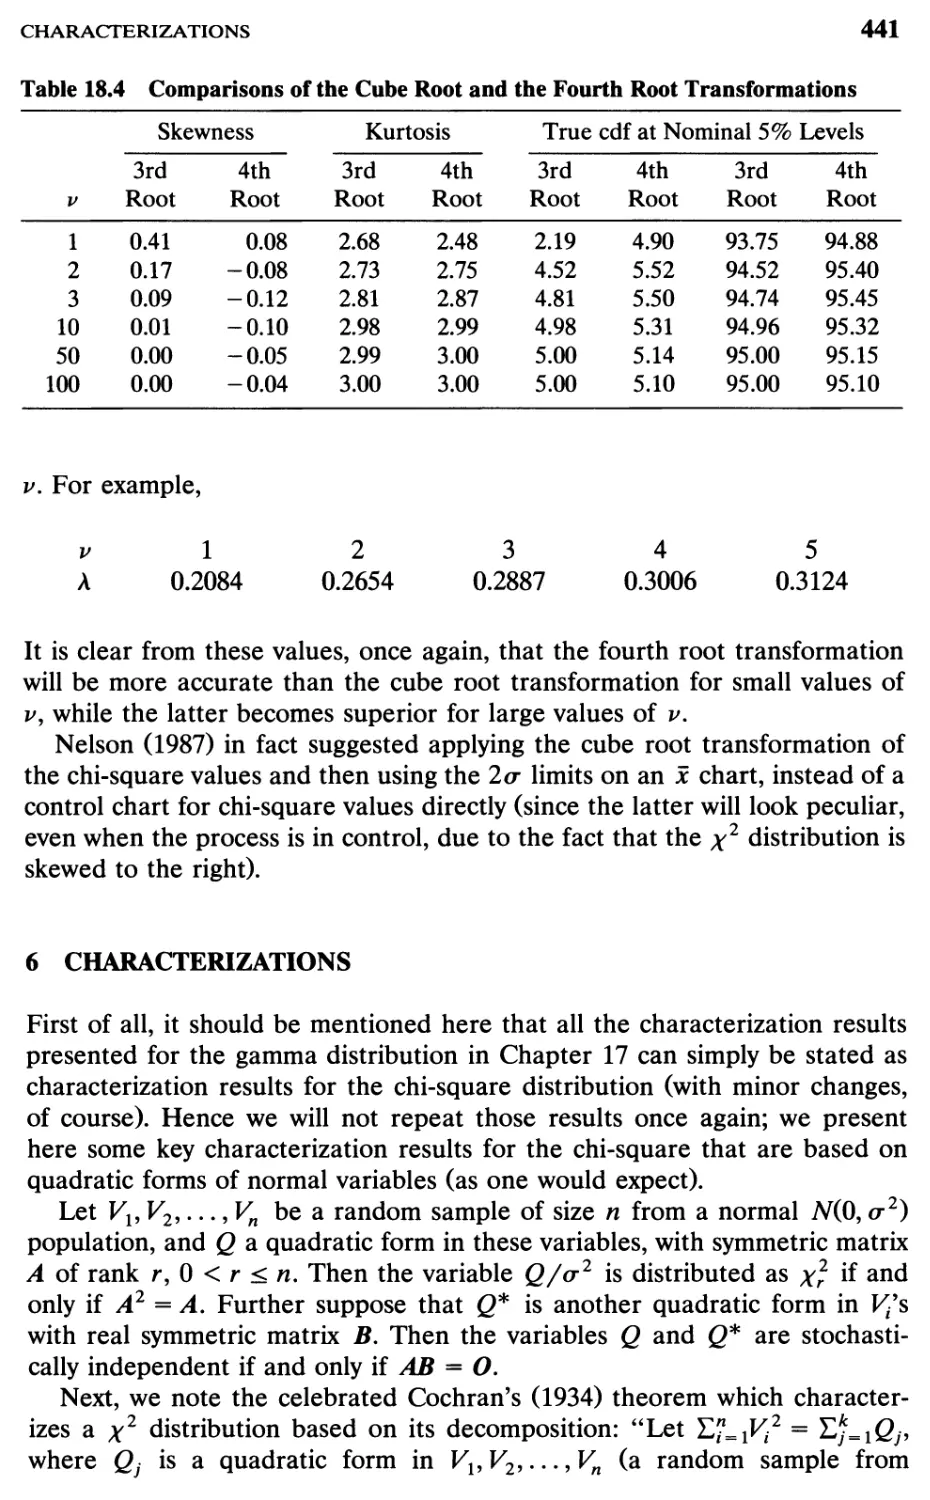 TABLE 18.4 Comparisons of the cube root and the fourth root 441
6 Characterizations, 441